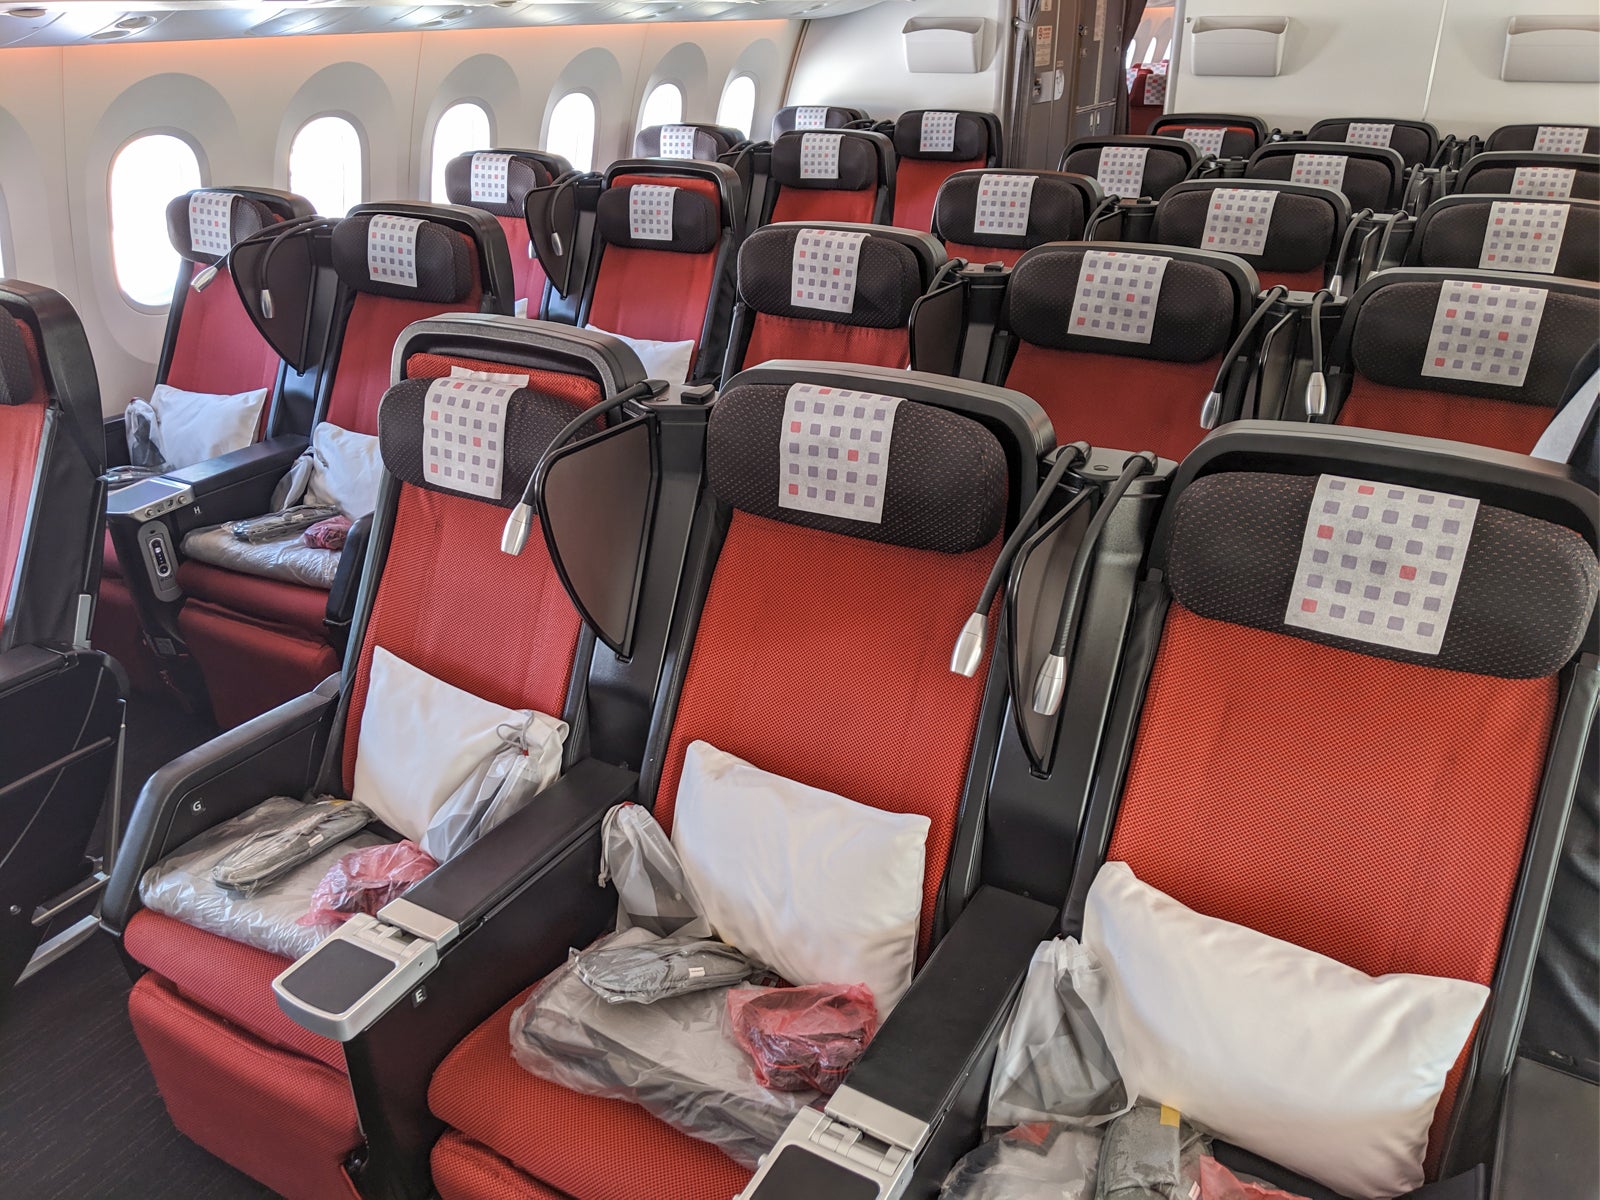 Hot Cabin, Cold Service: LOT Premium Economy (787-8) From Chicago to Warsaw  - The Points Guy